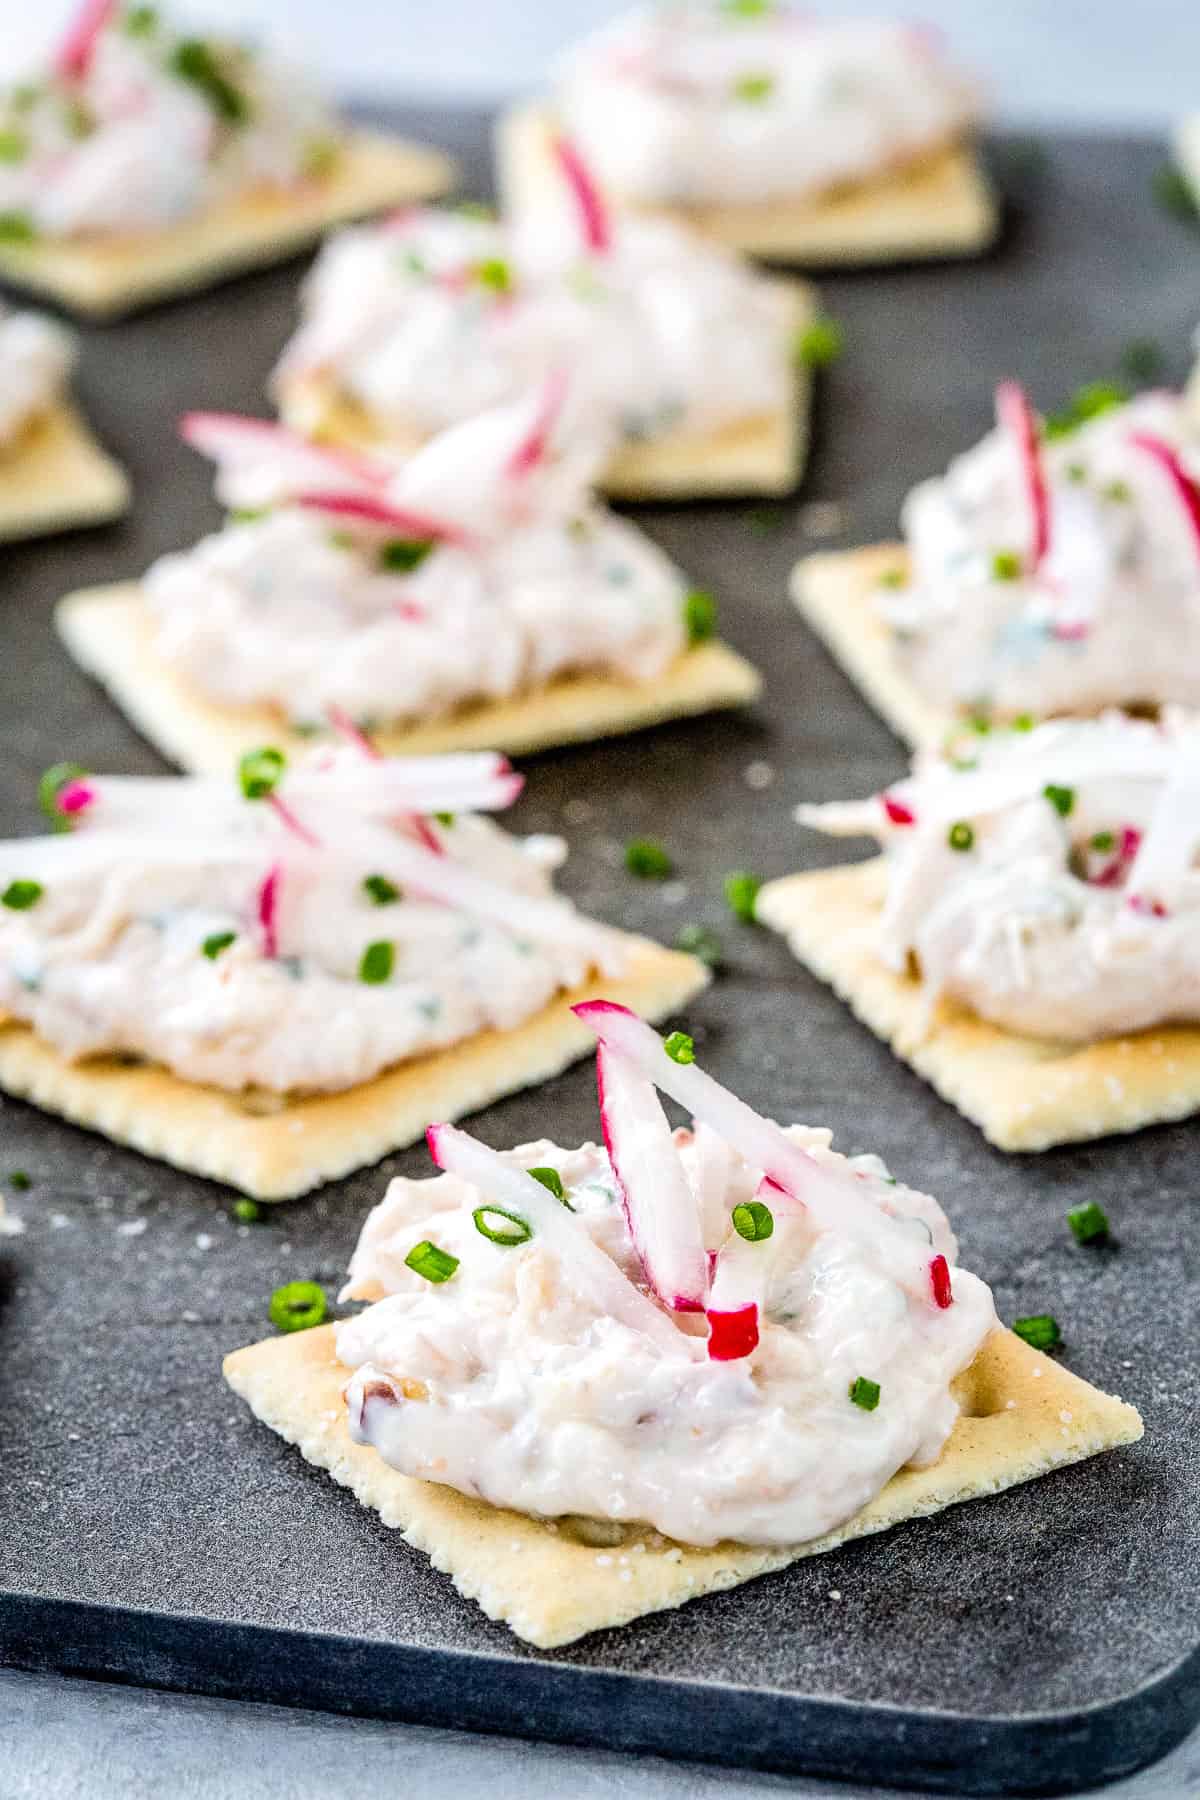 saltine crackers topped with cold crab dip, radishes, and chives.